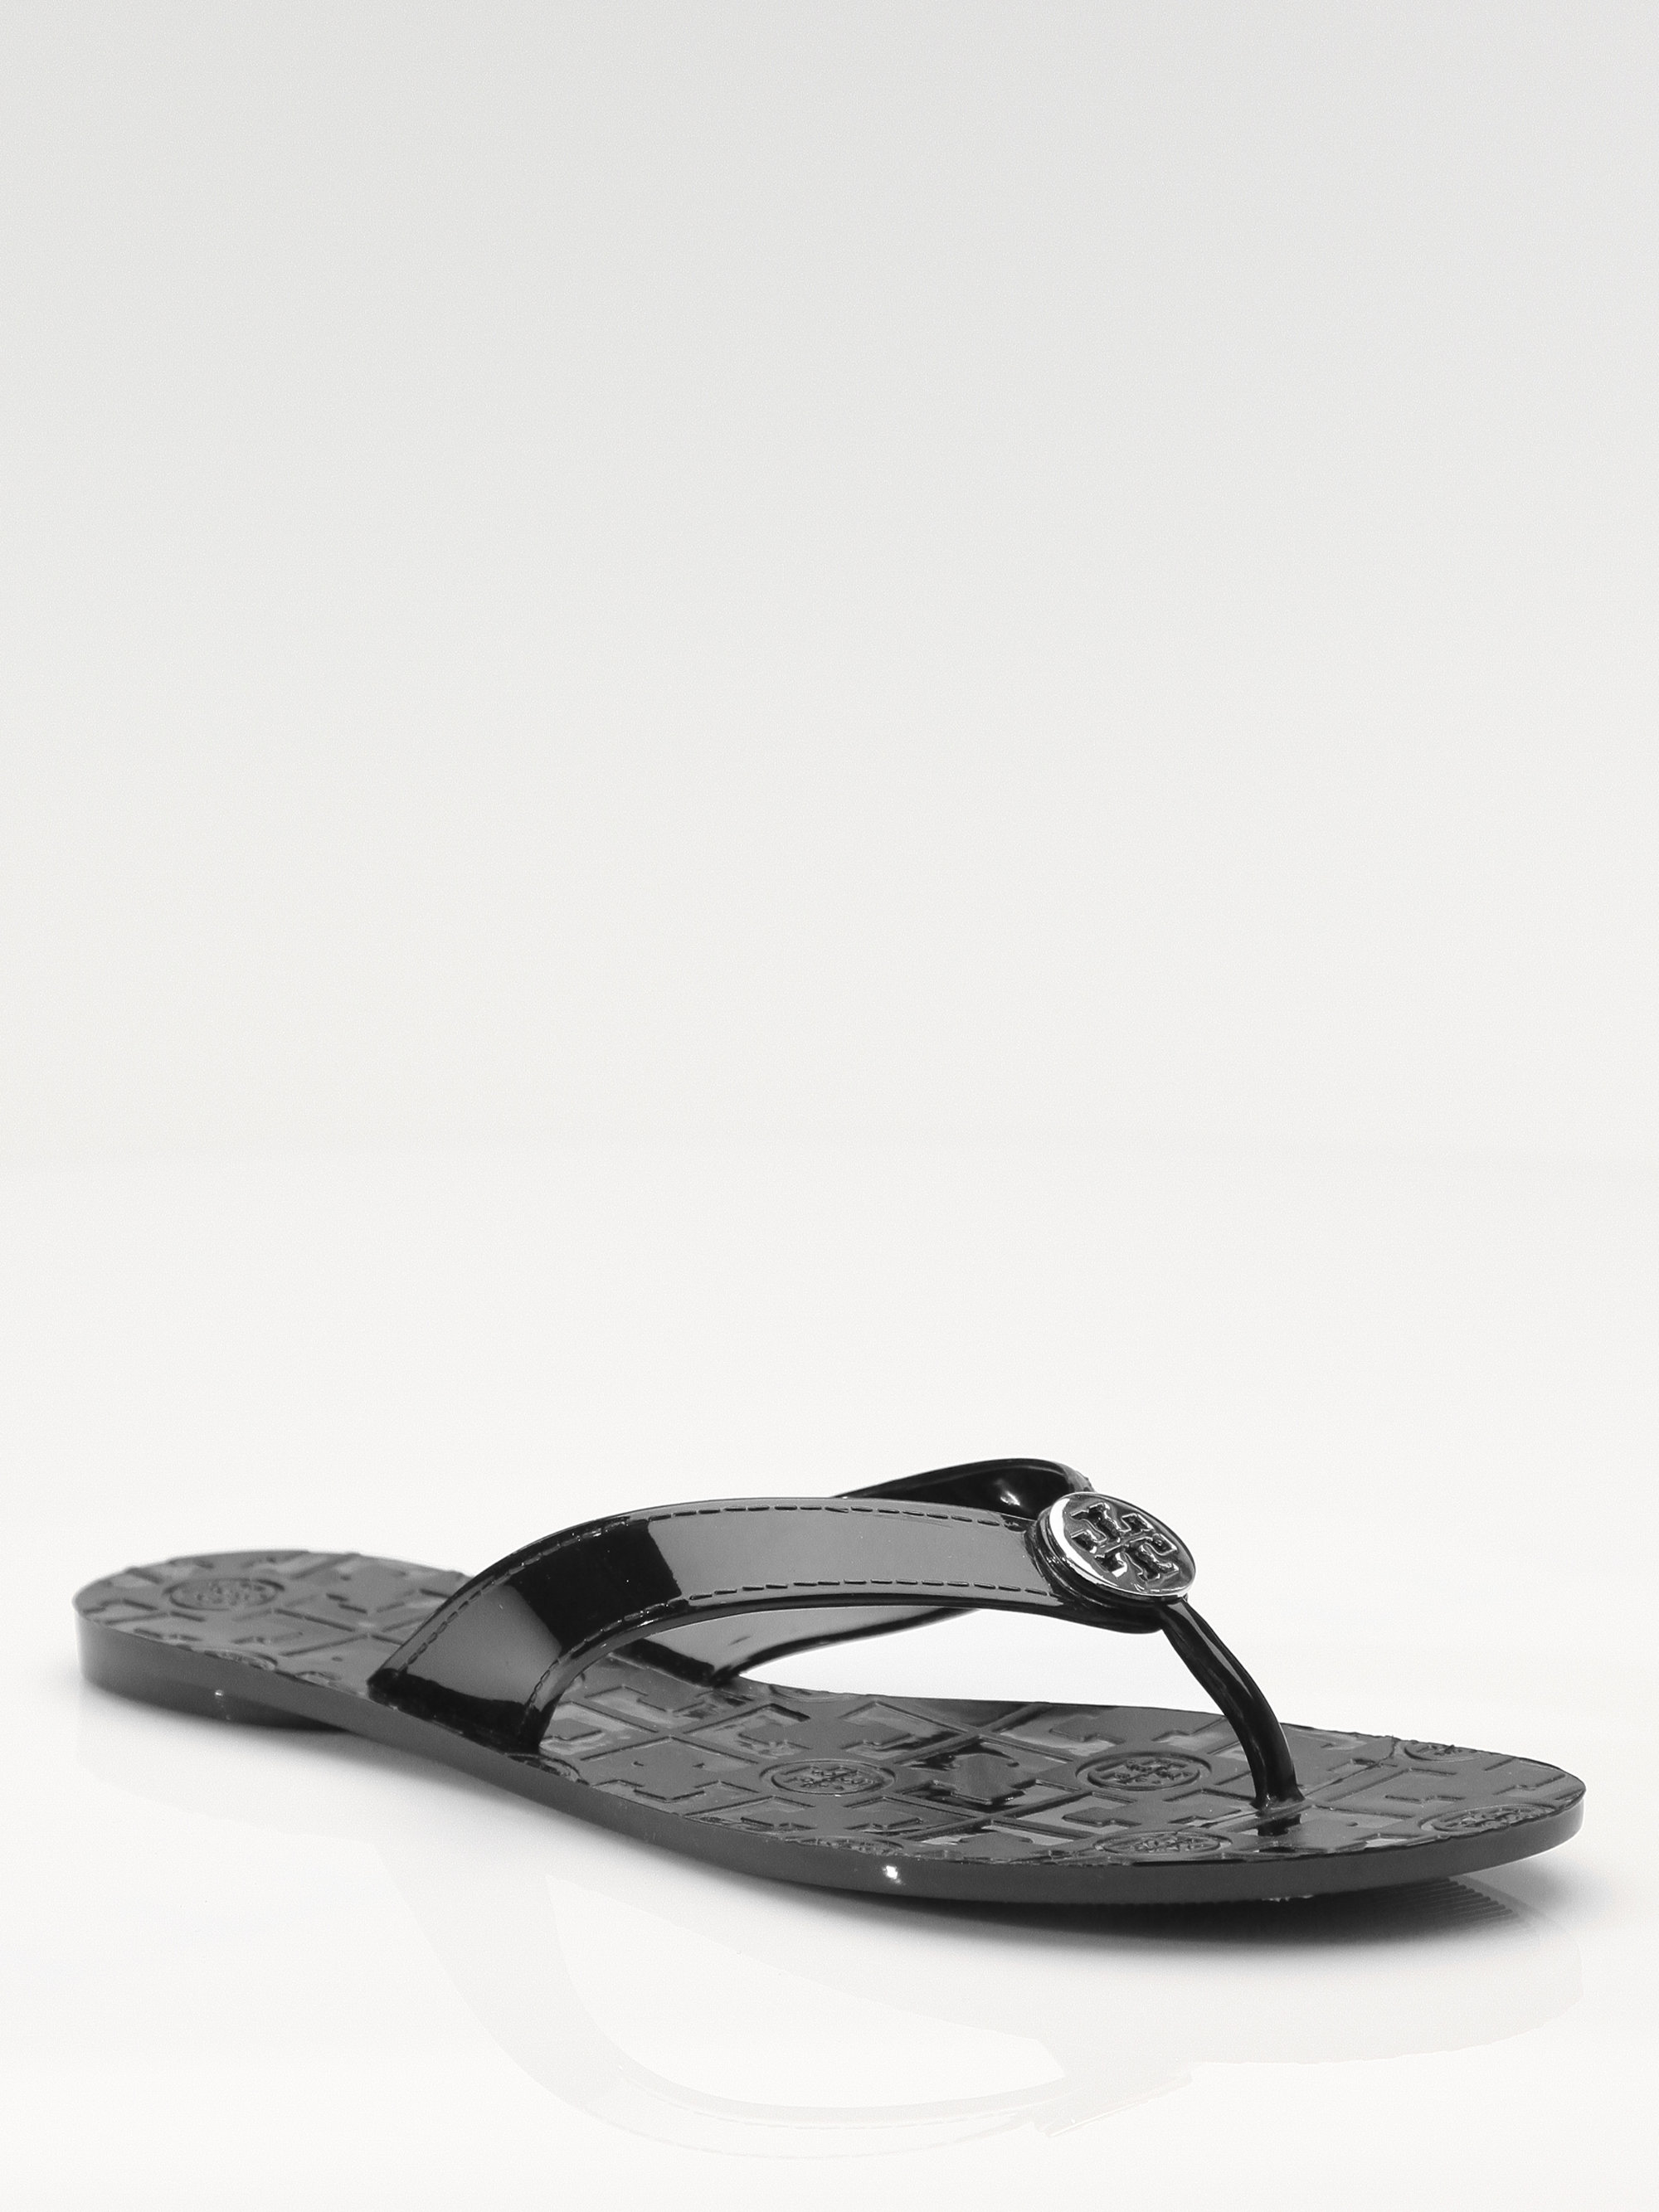 Lyst - Tory burch Thora Patent Leather Flip Flops in Black